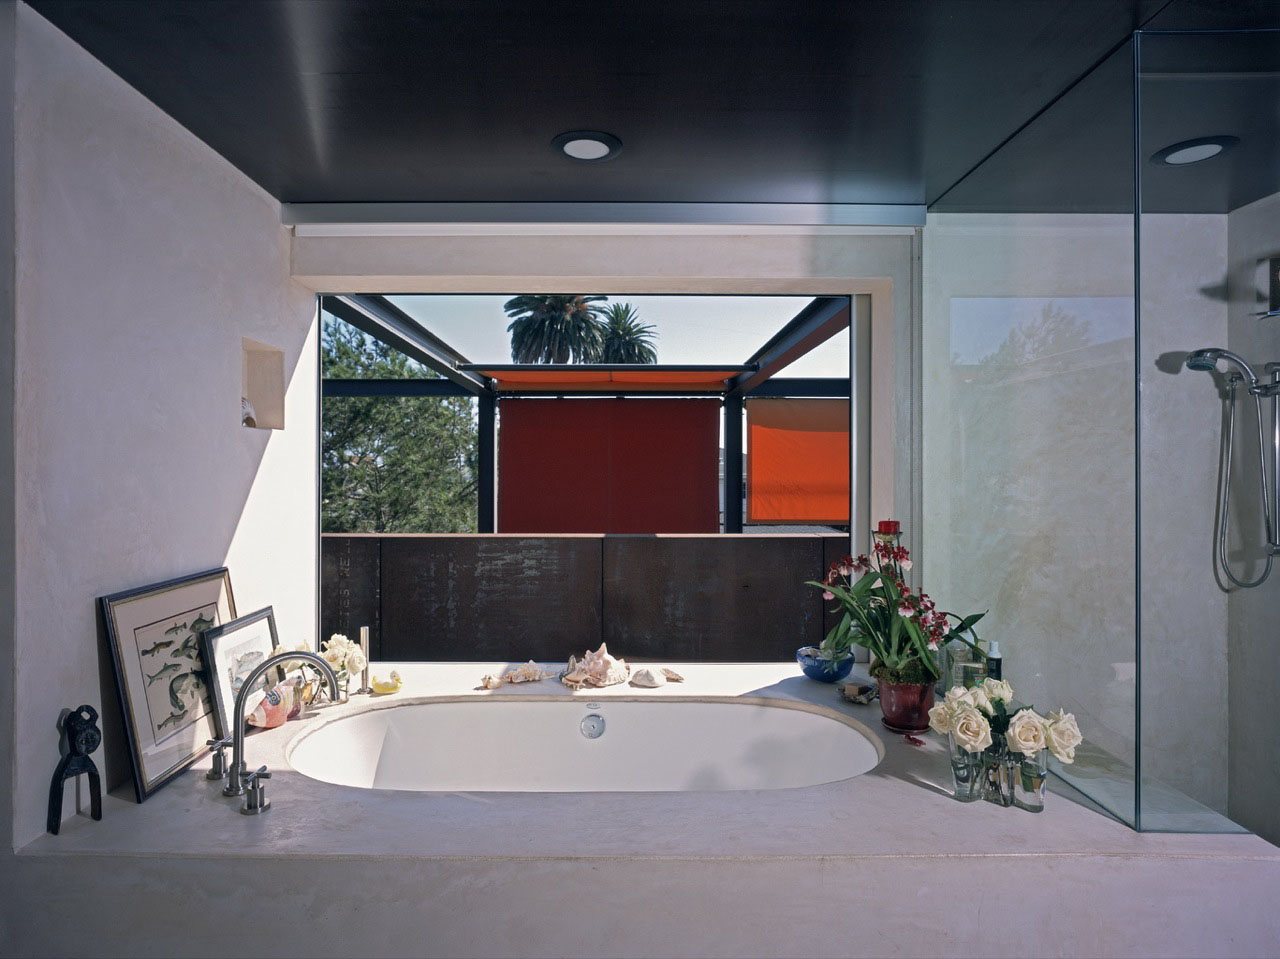 Bathroom of 700 Palms Residence by Ehrlich Architects